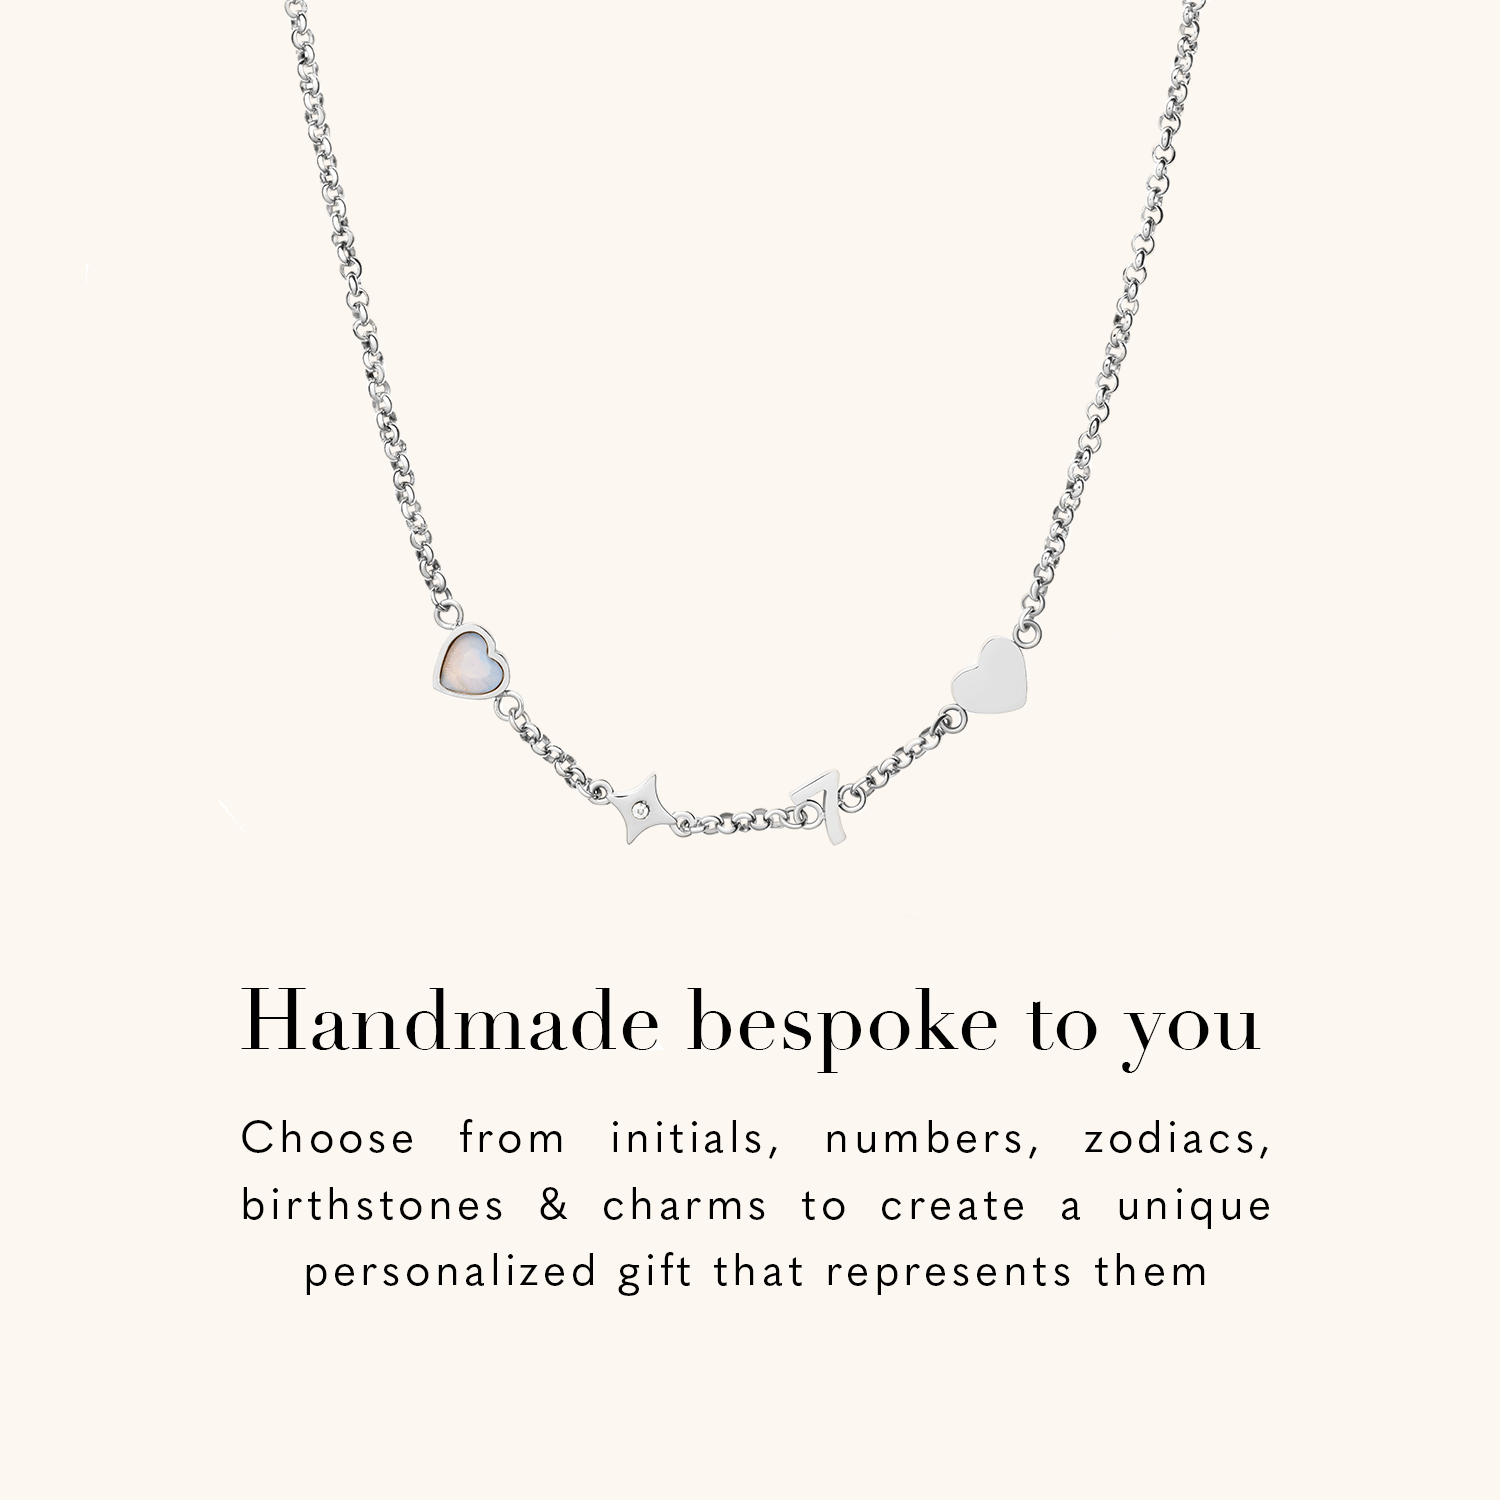 Just the Chain. Silver Plated Necklace Chain. Build Your Own Charm